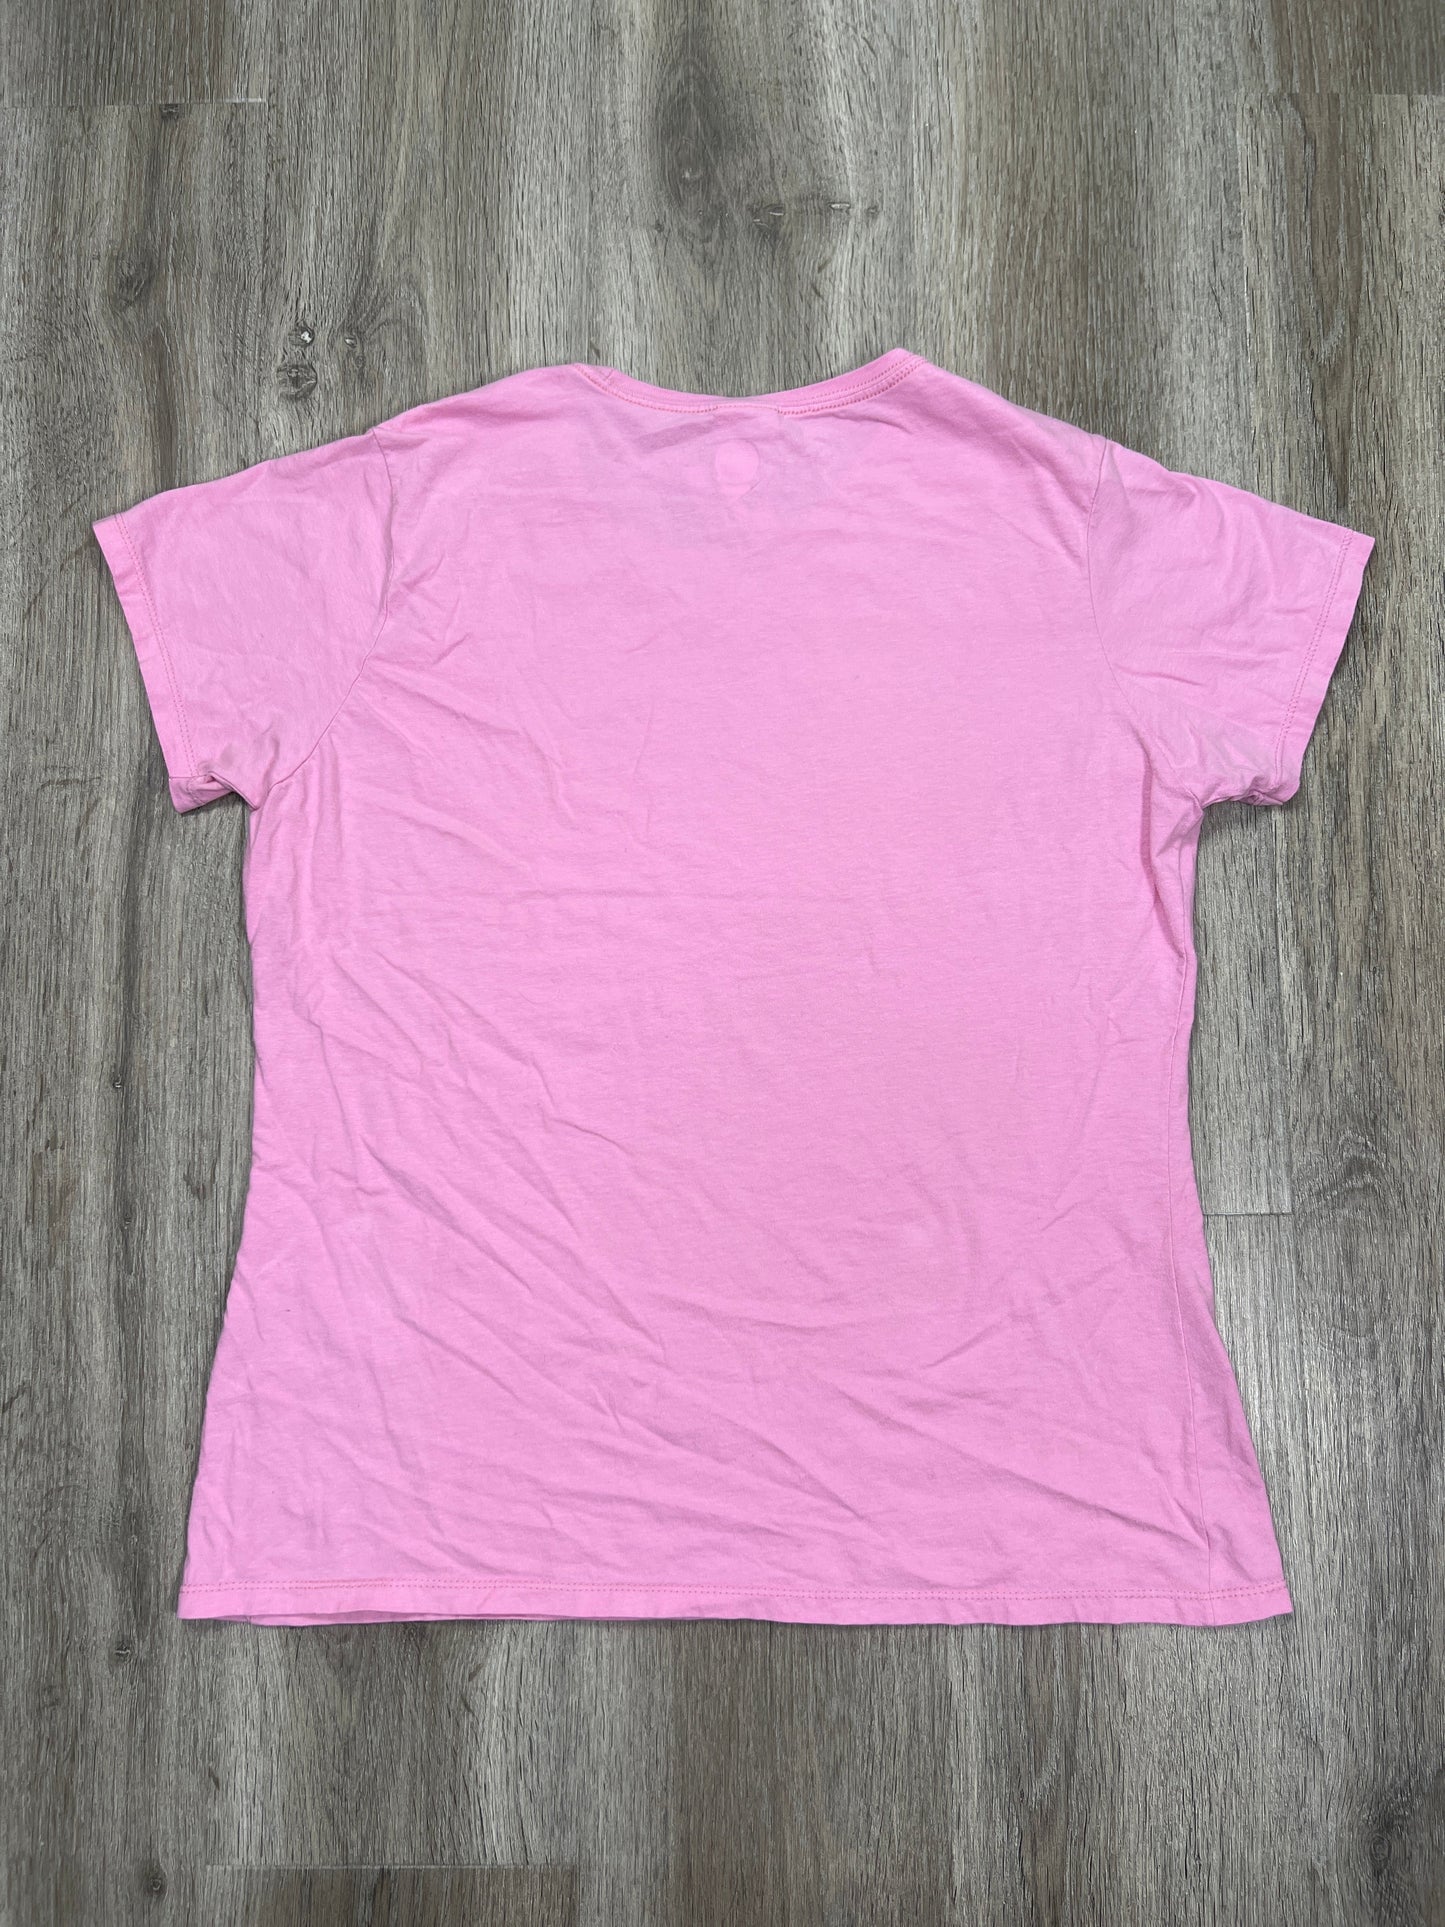 Pink Top Short Sleeve Clothes Mentor, Size L